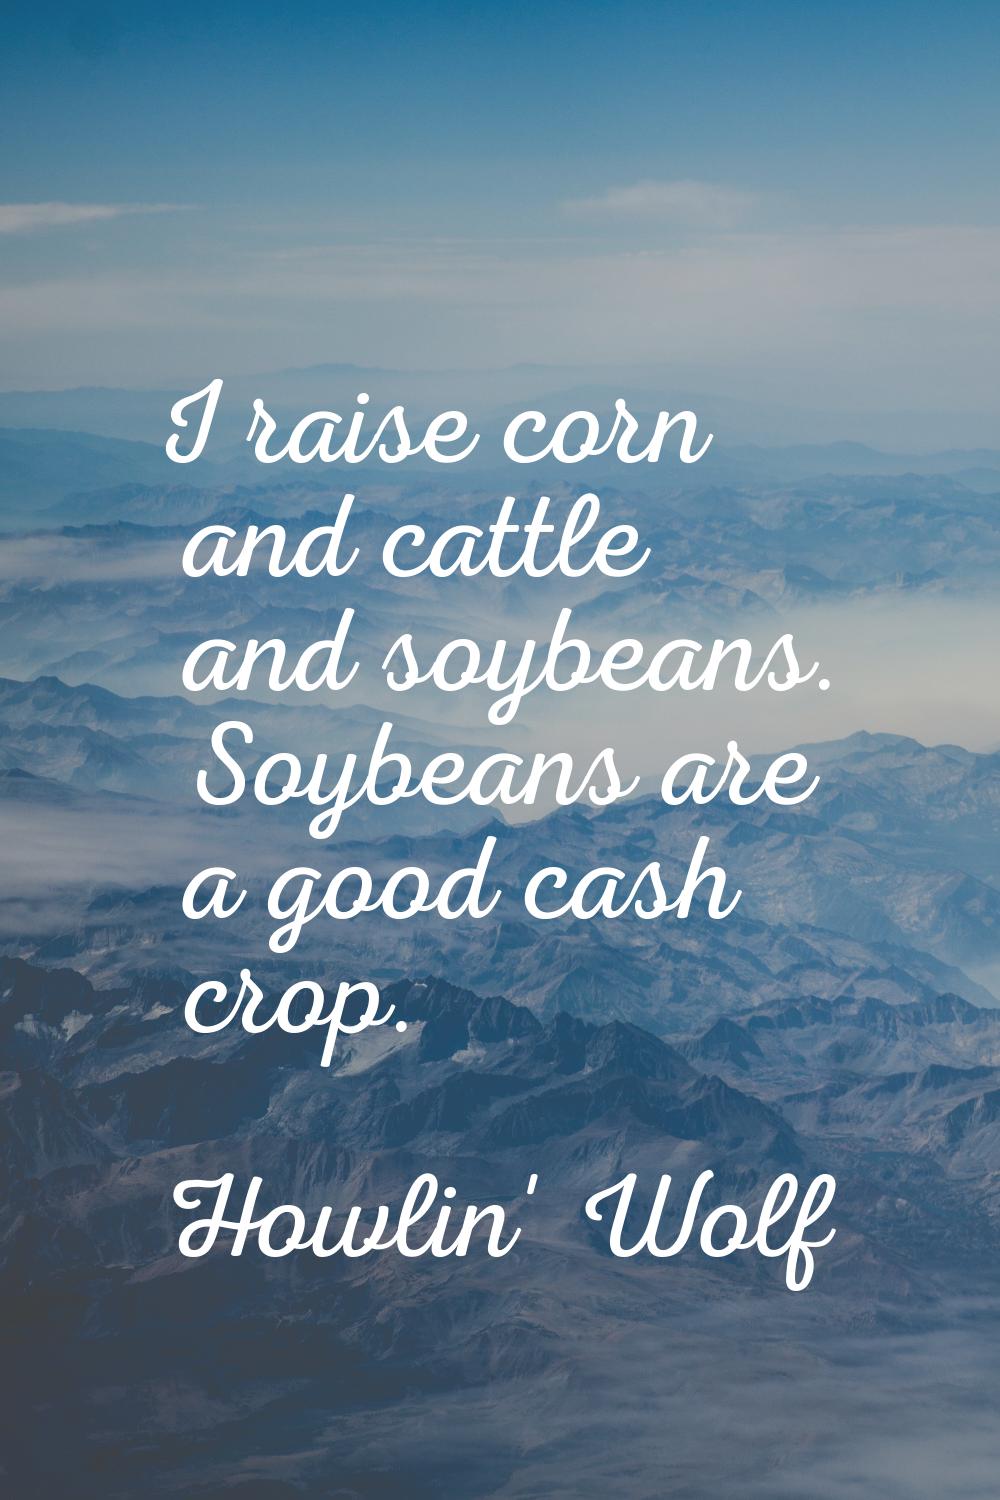 I raise corn and cattle and soybeans. Soybeans are a good cash crop.